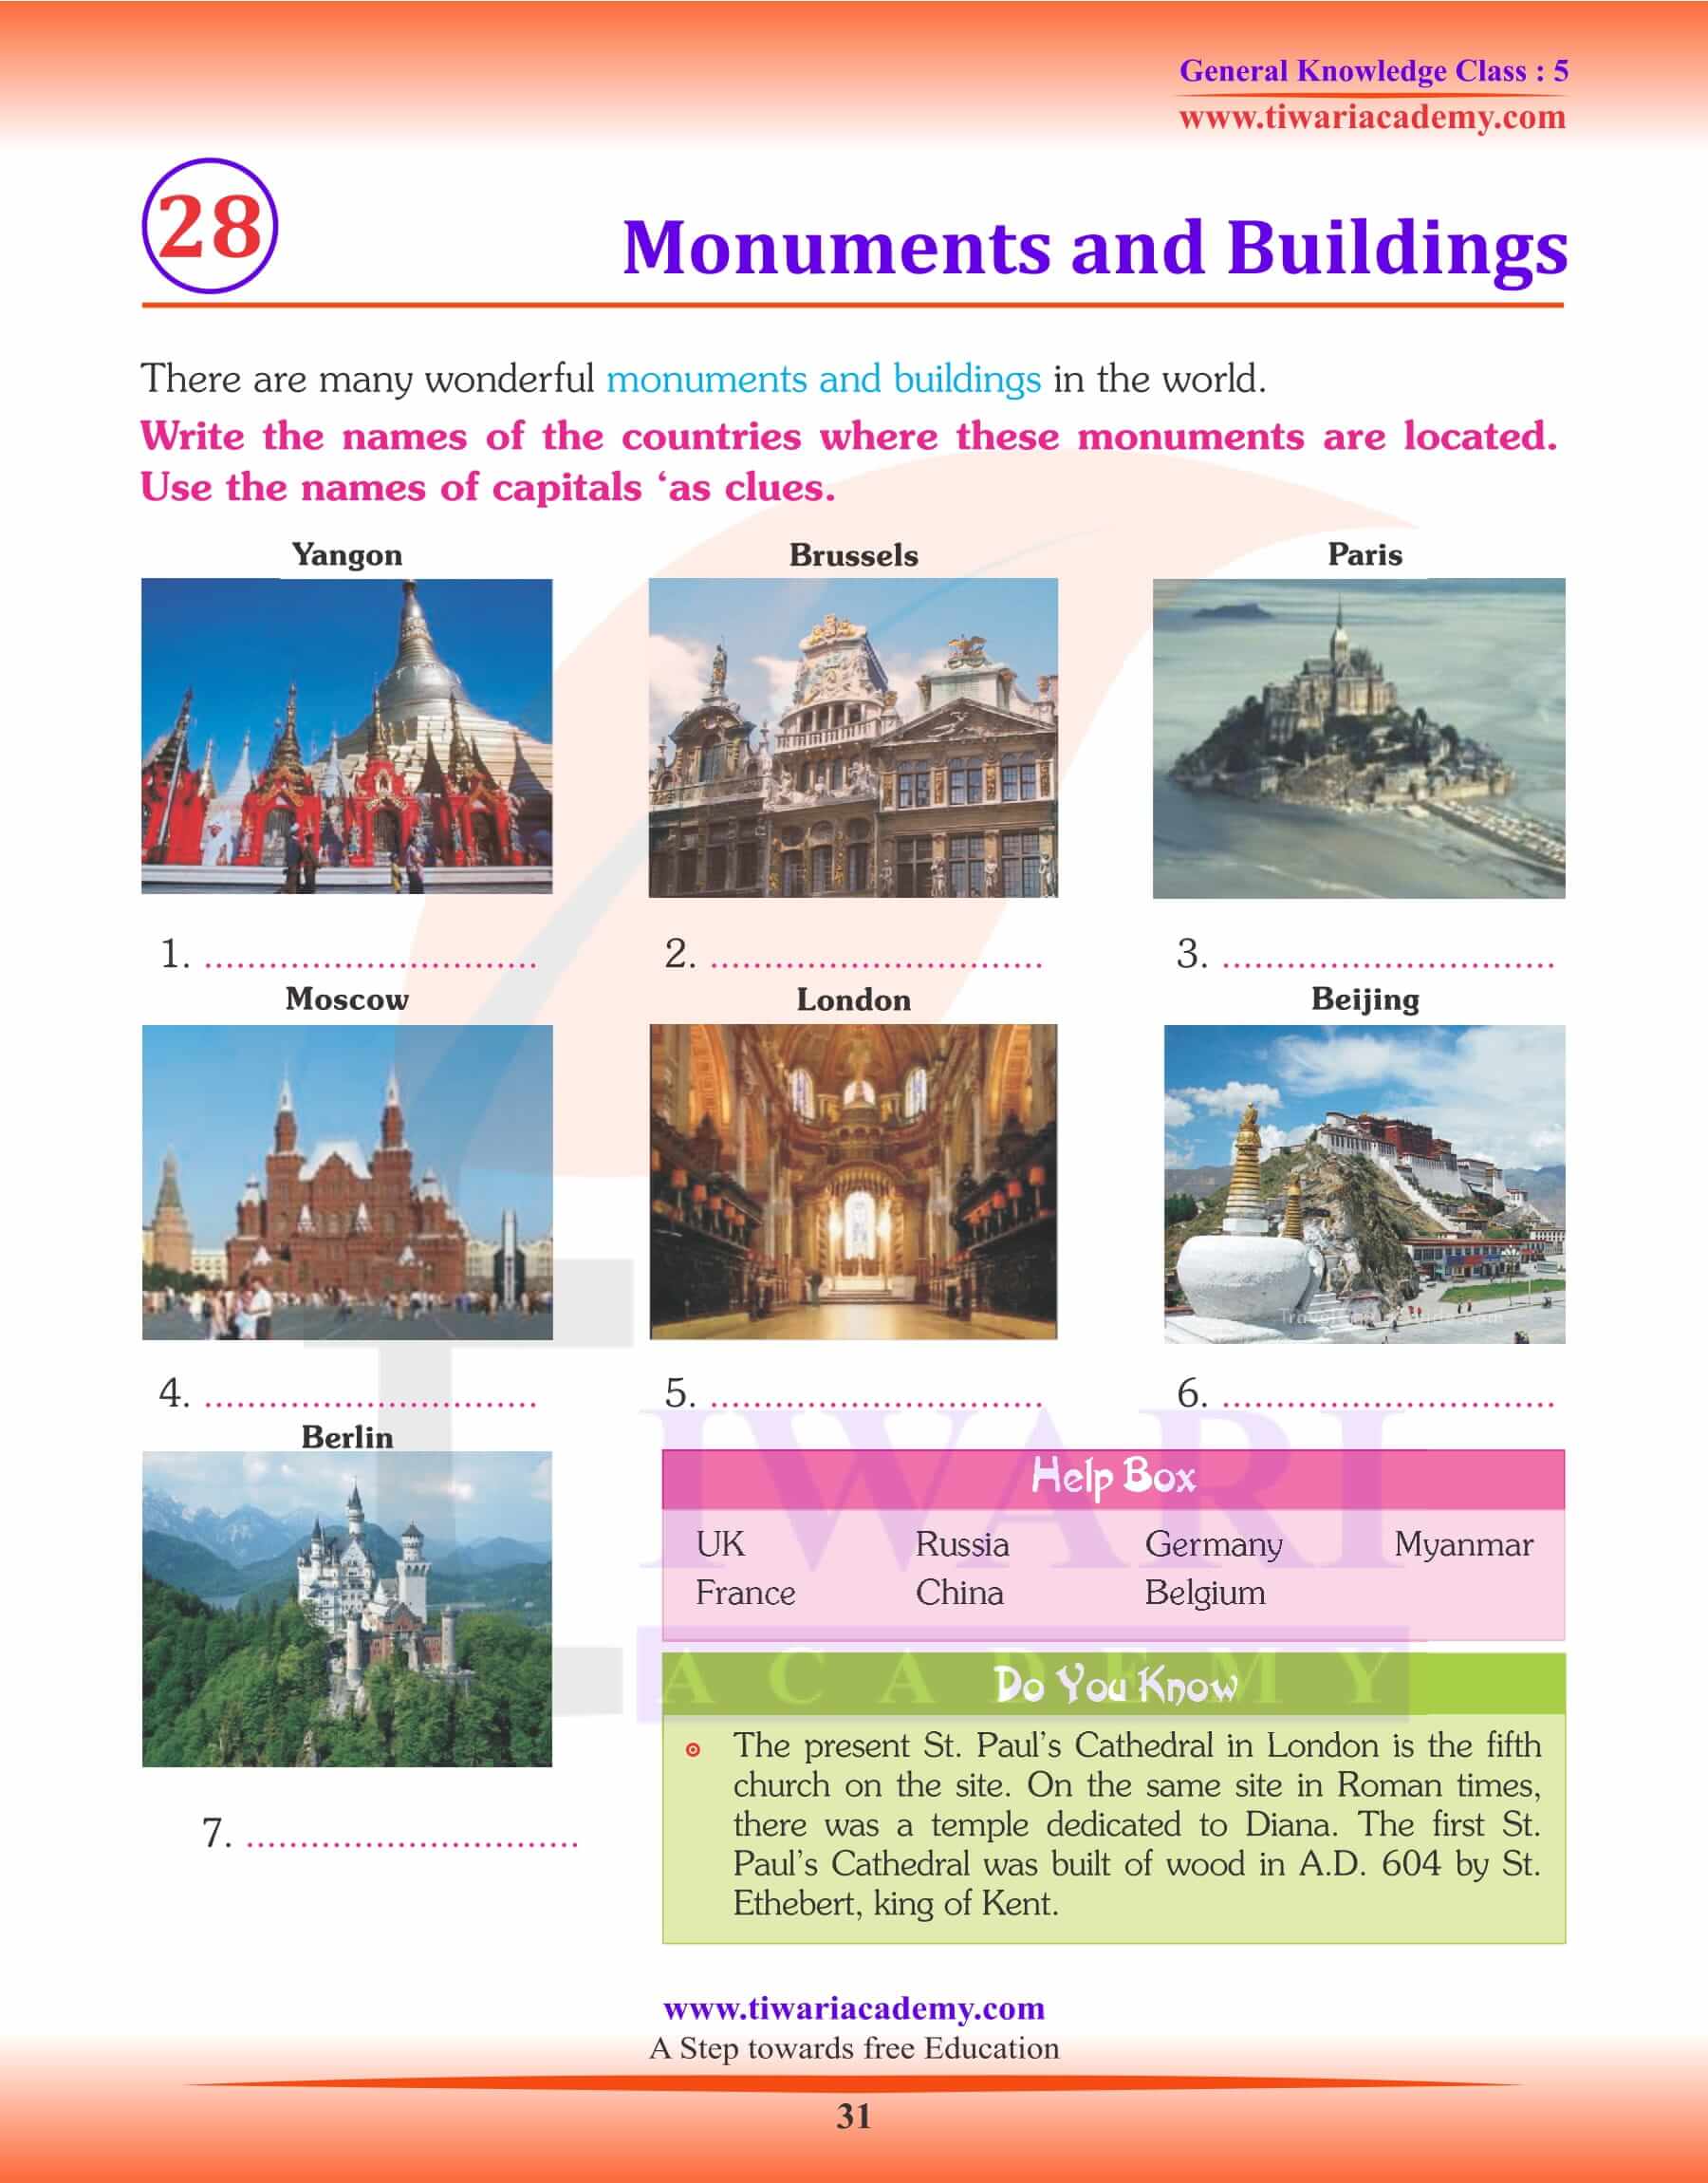 Monuments and Buildings